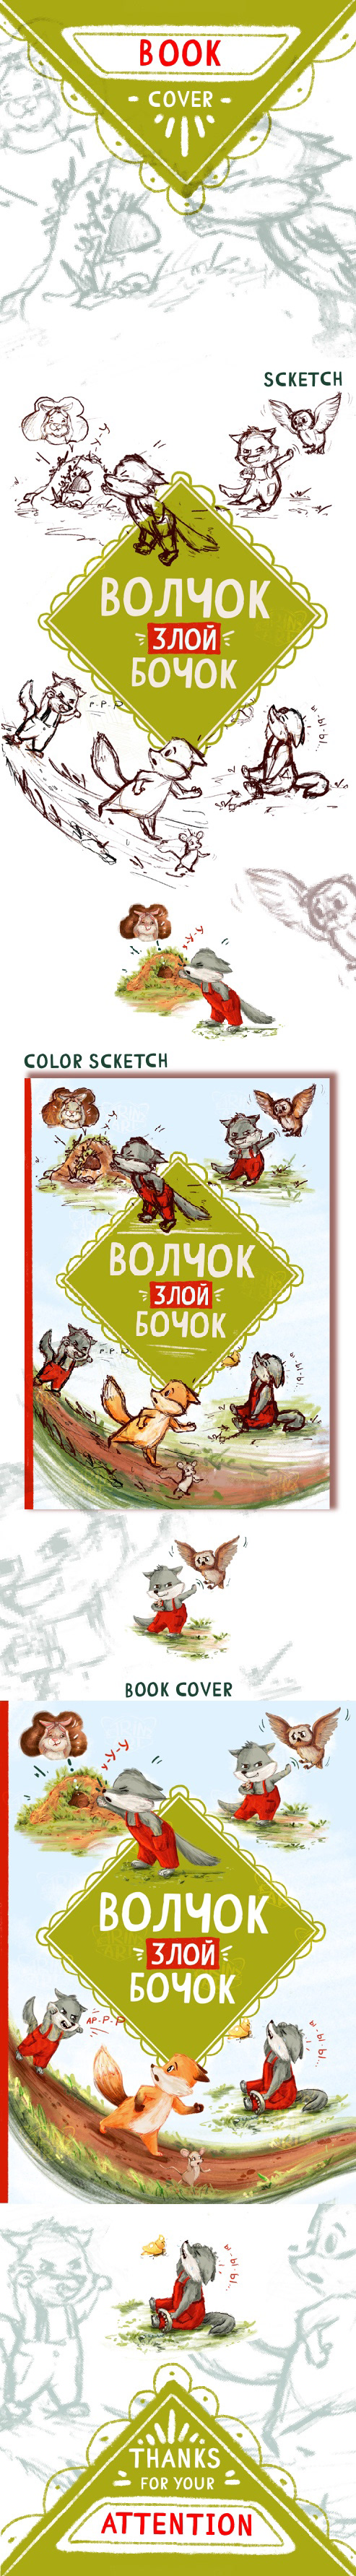 book cover design children wolf mouse emotions FOX